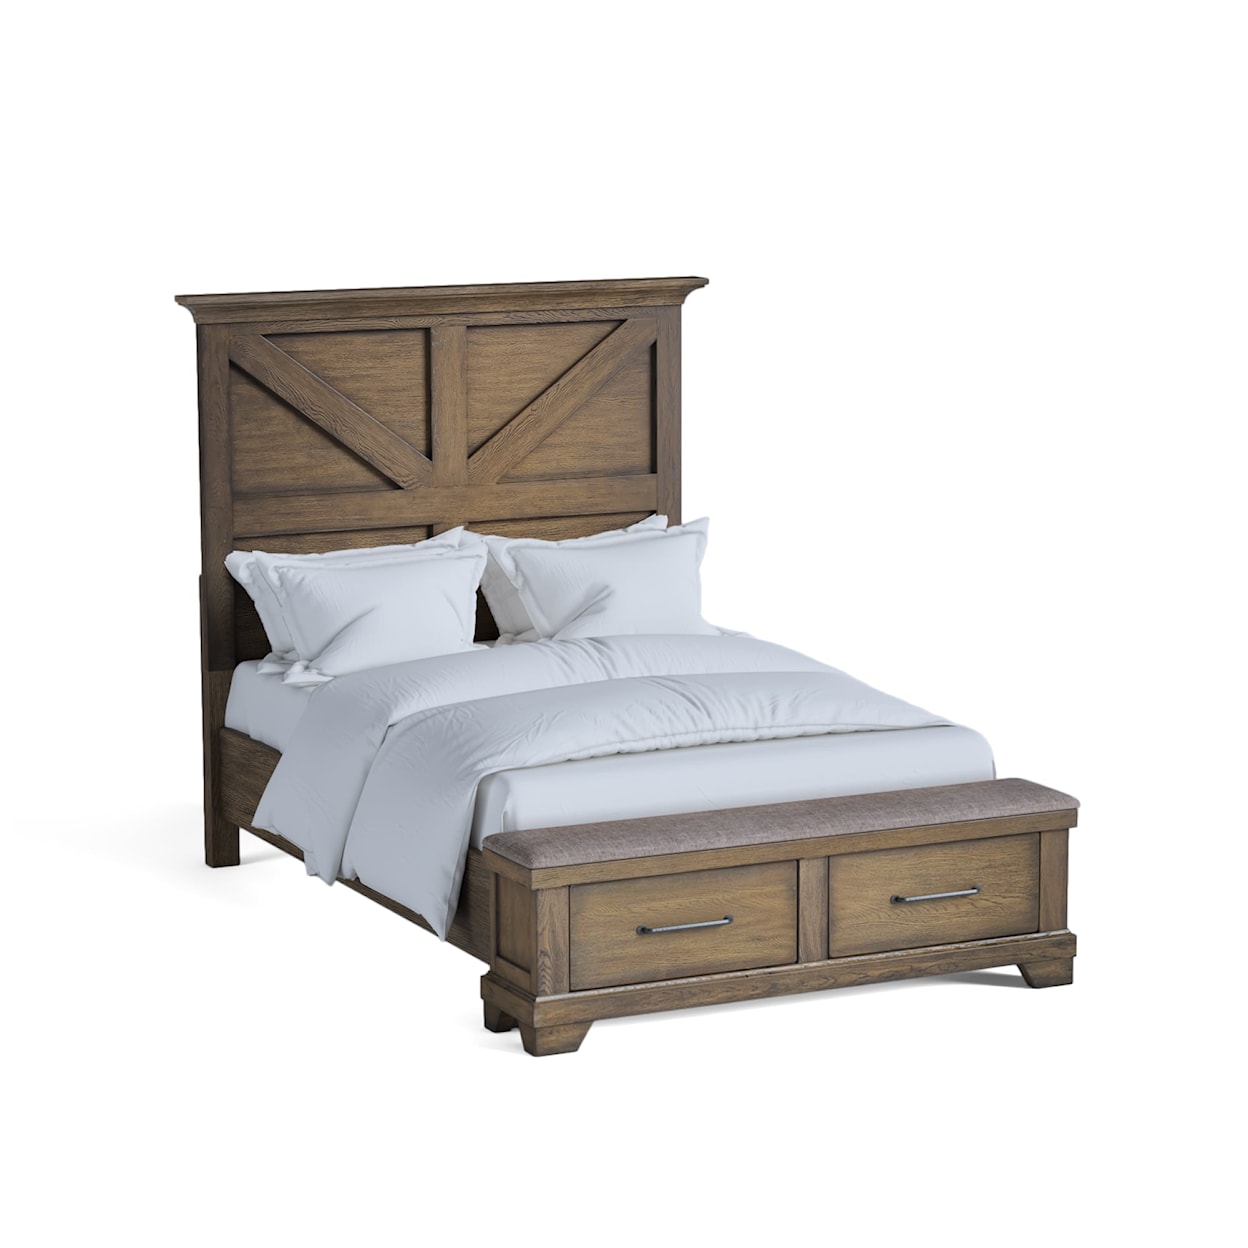 Global Home Stone Creek Stone Creek Queen Bed W/Storge